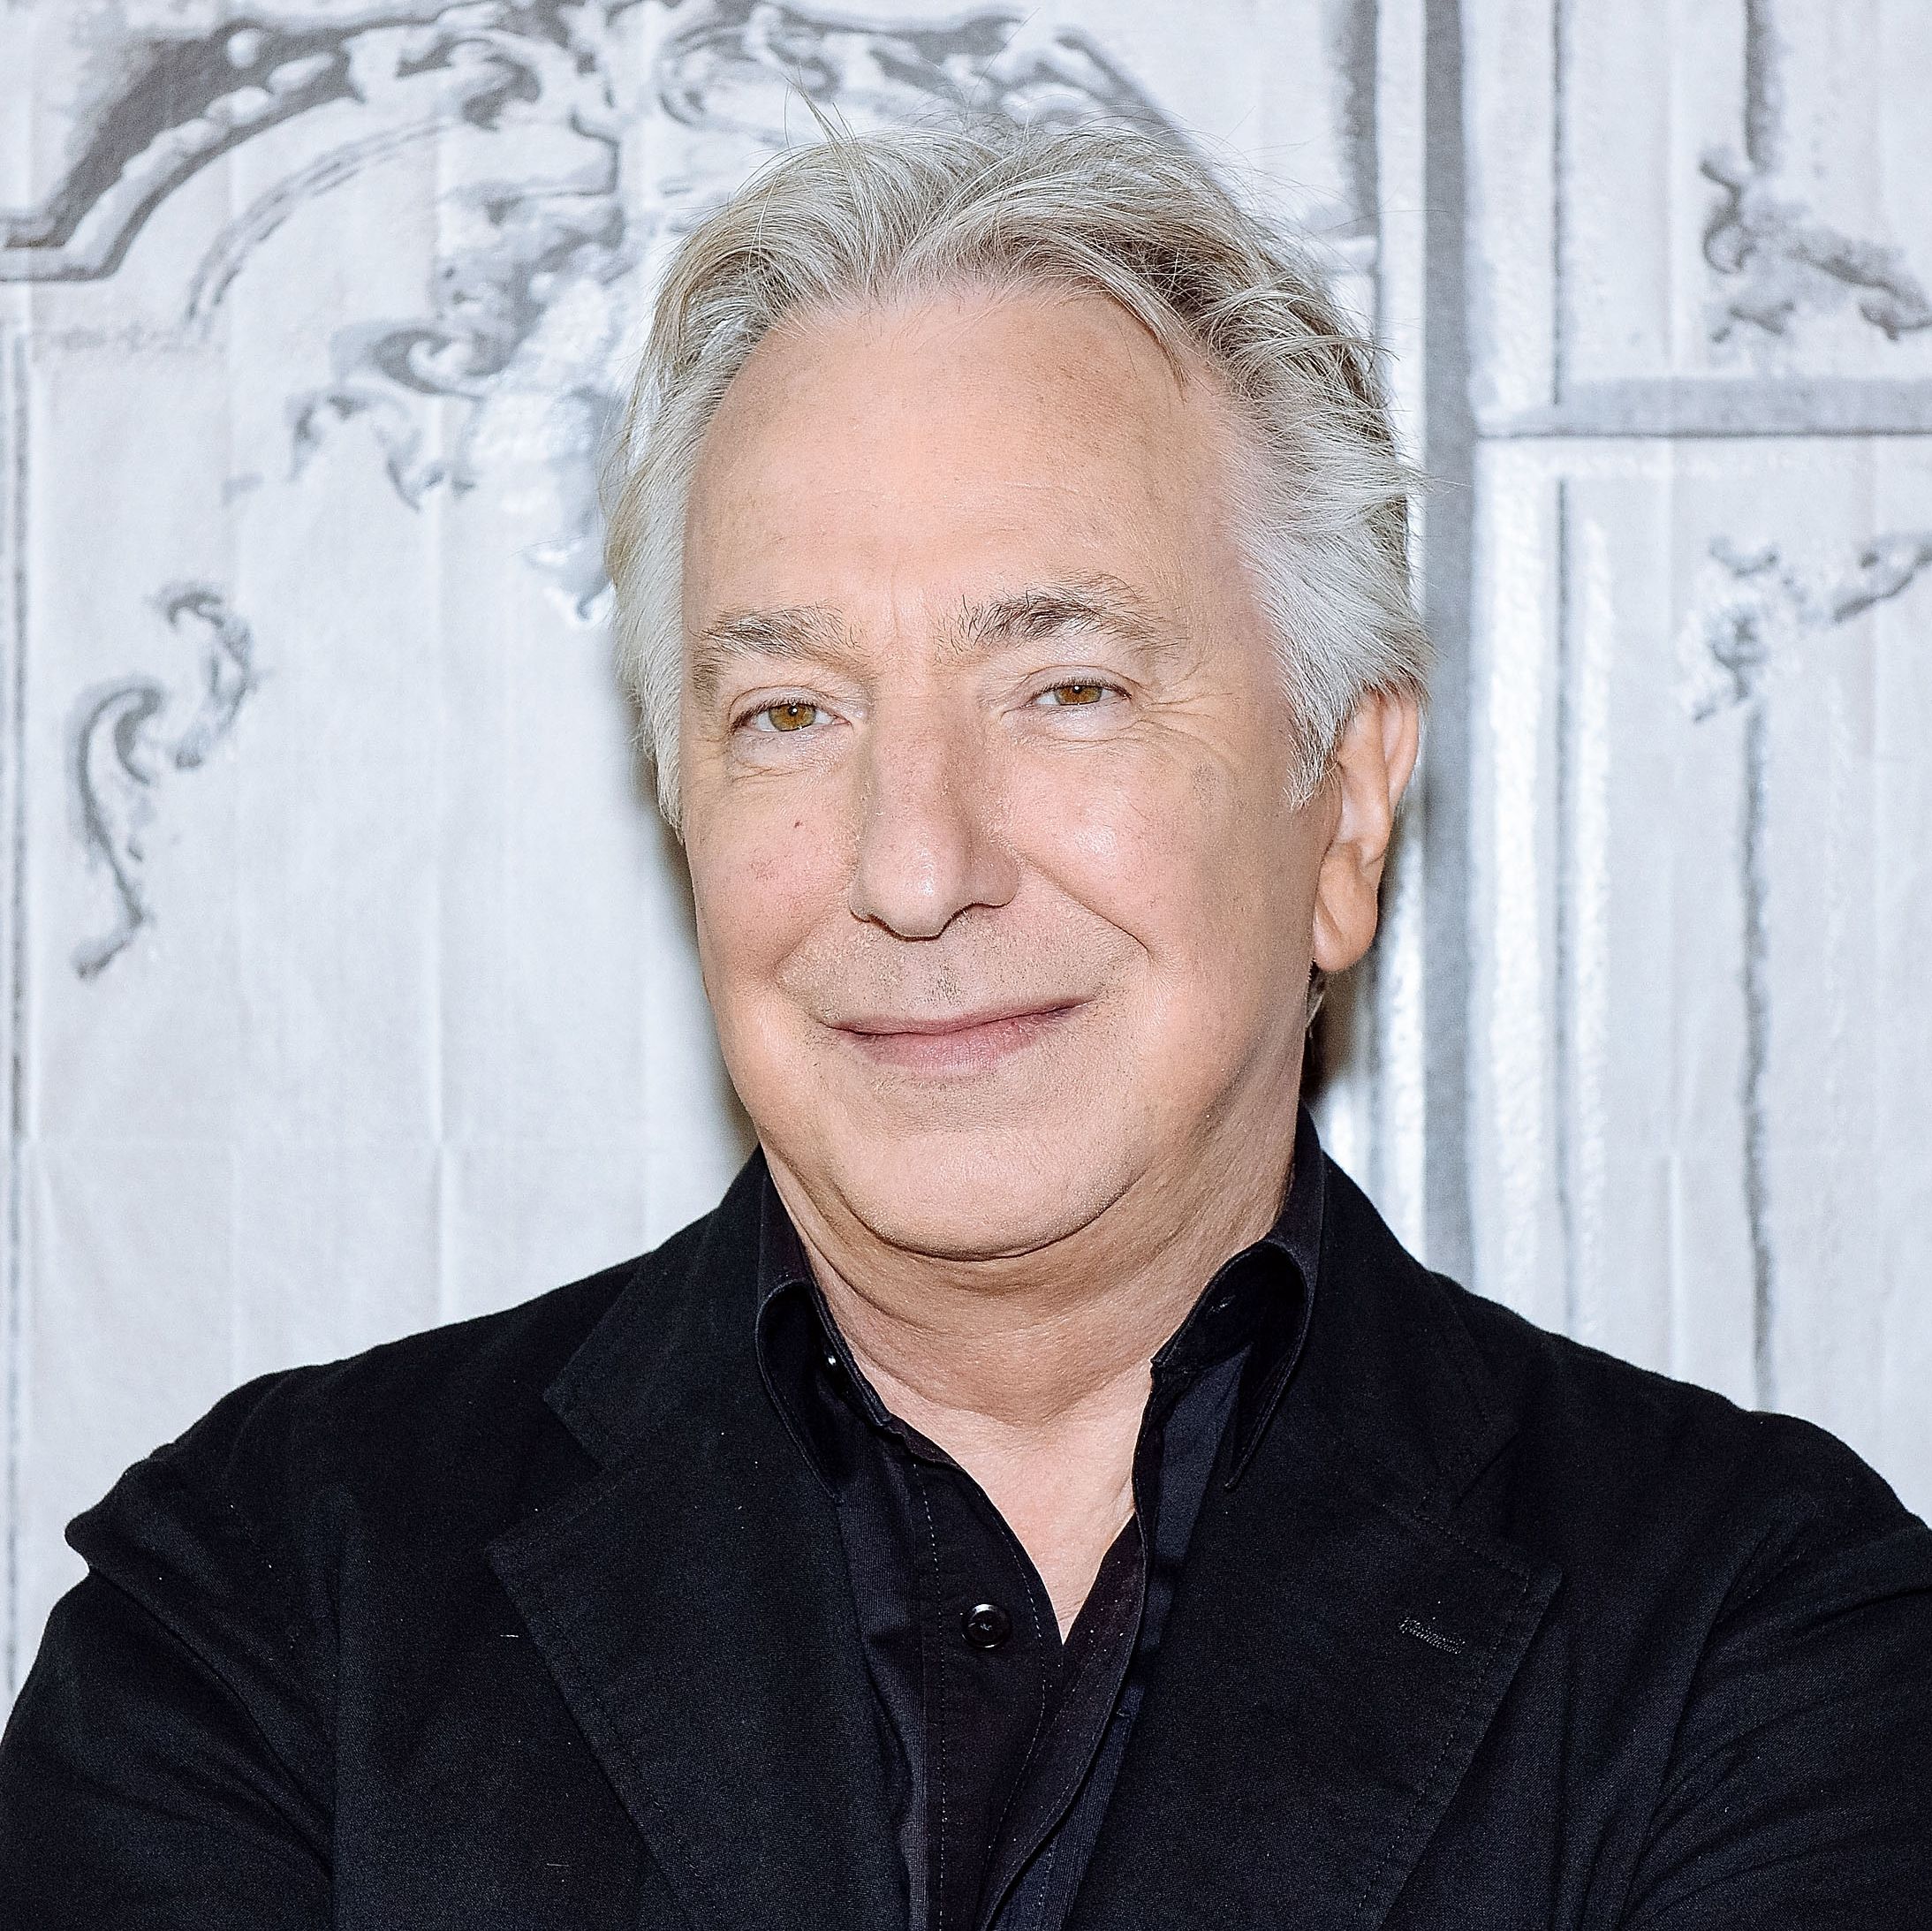 Alan Rickman, villain in 'Harry Potter' and star of stage, dies at